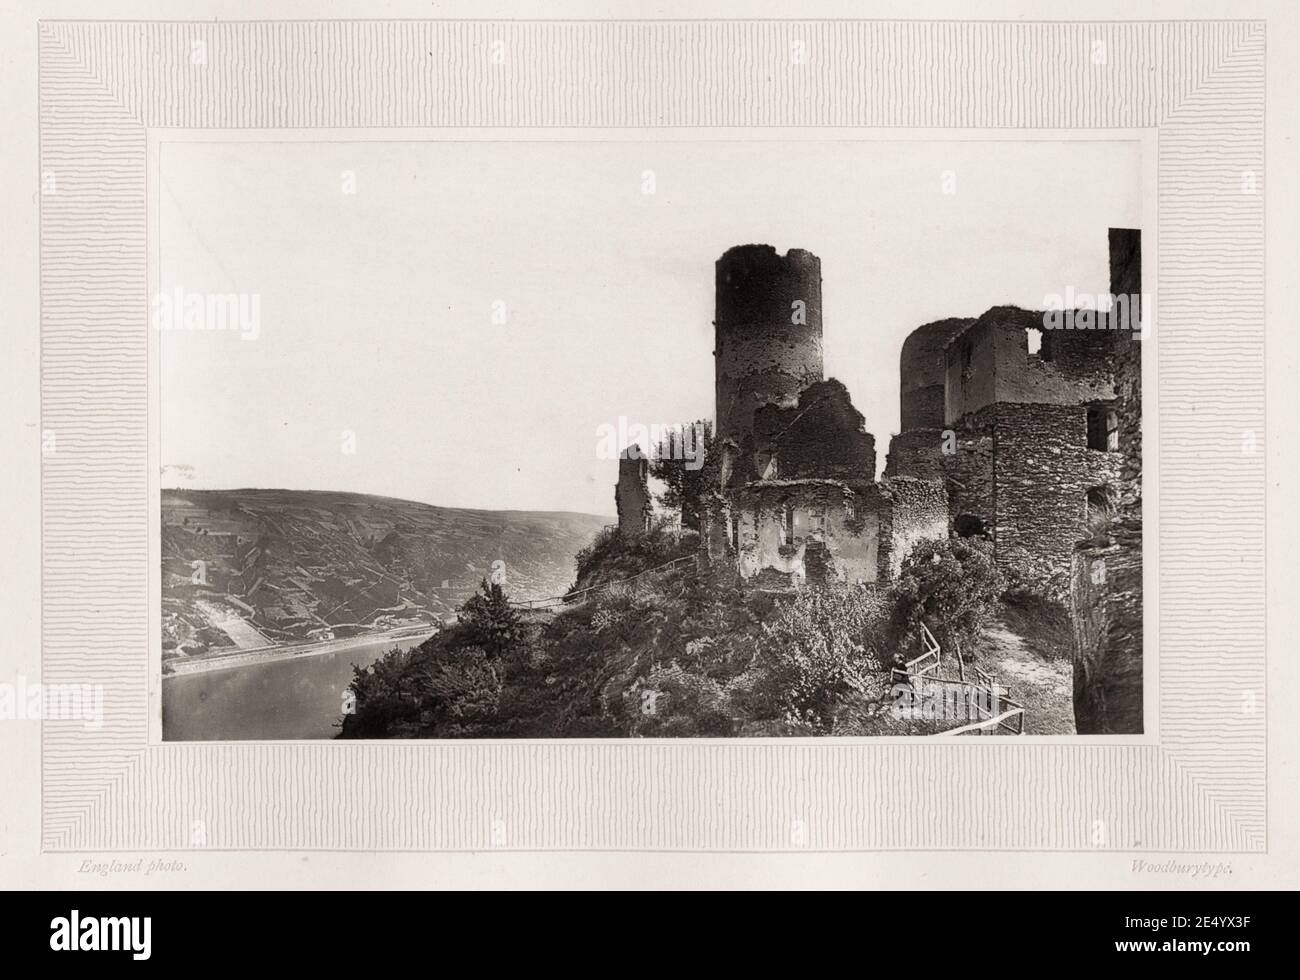 Vintage 19th century photograph: The Schönburg is a castle above the medieval town of Oberwesel in the UNESCO World Heritage site of the Upper Middle Rhine Valley, Rhineland-Palatinate, Germany. Woodburytype from a photograph by William England. Stock Photo